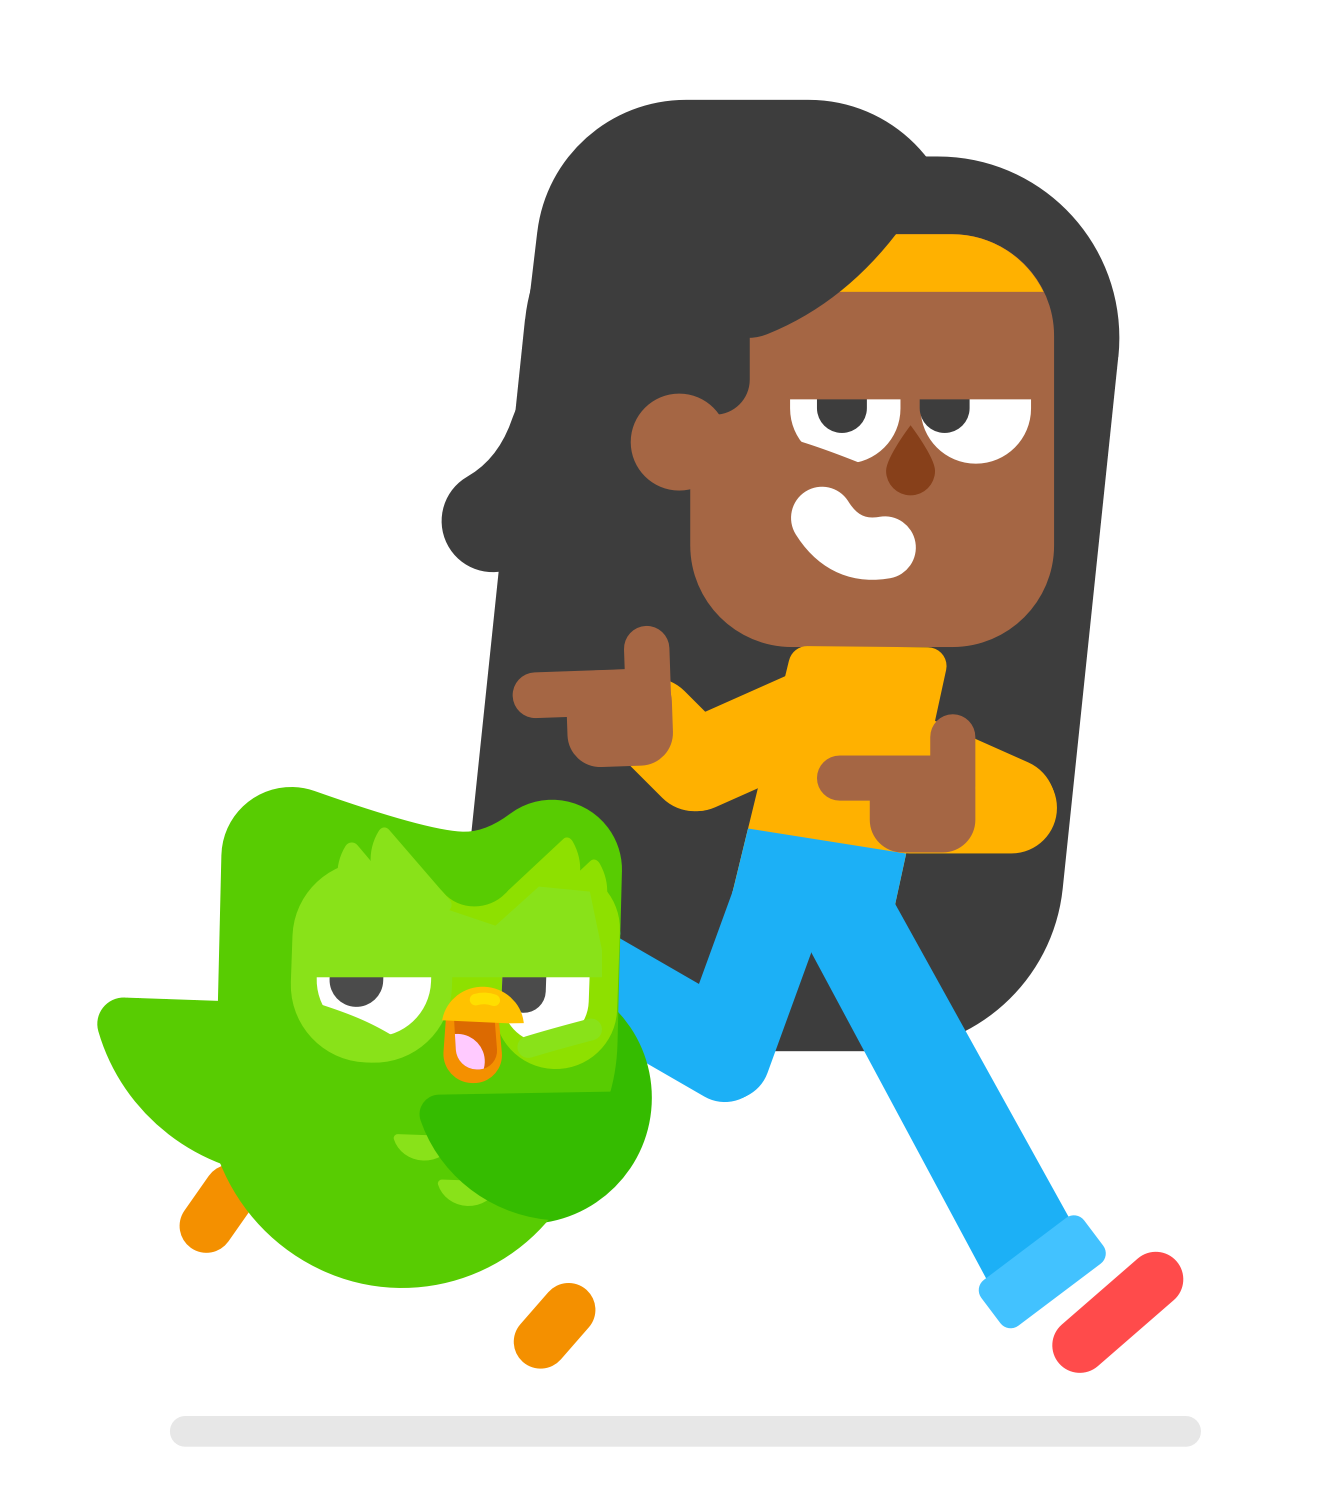 illustration of Duolingo character Bea, running alongside Duo the owl, both are grinning and pointing at the viewer with both fingers (wings)